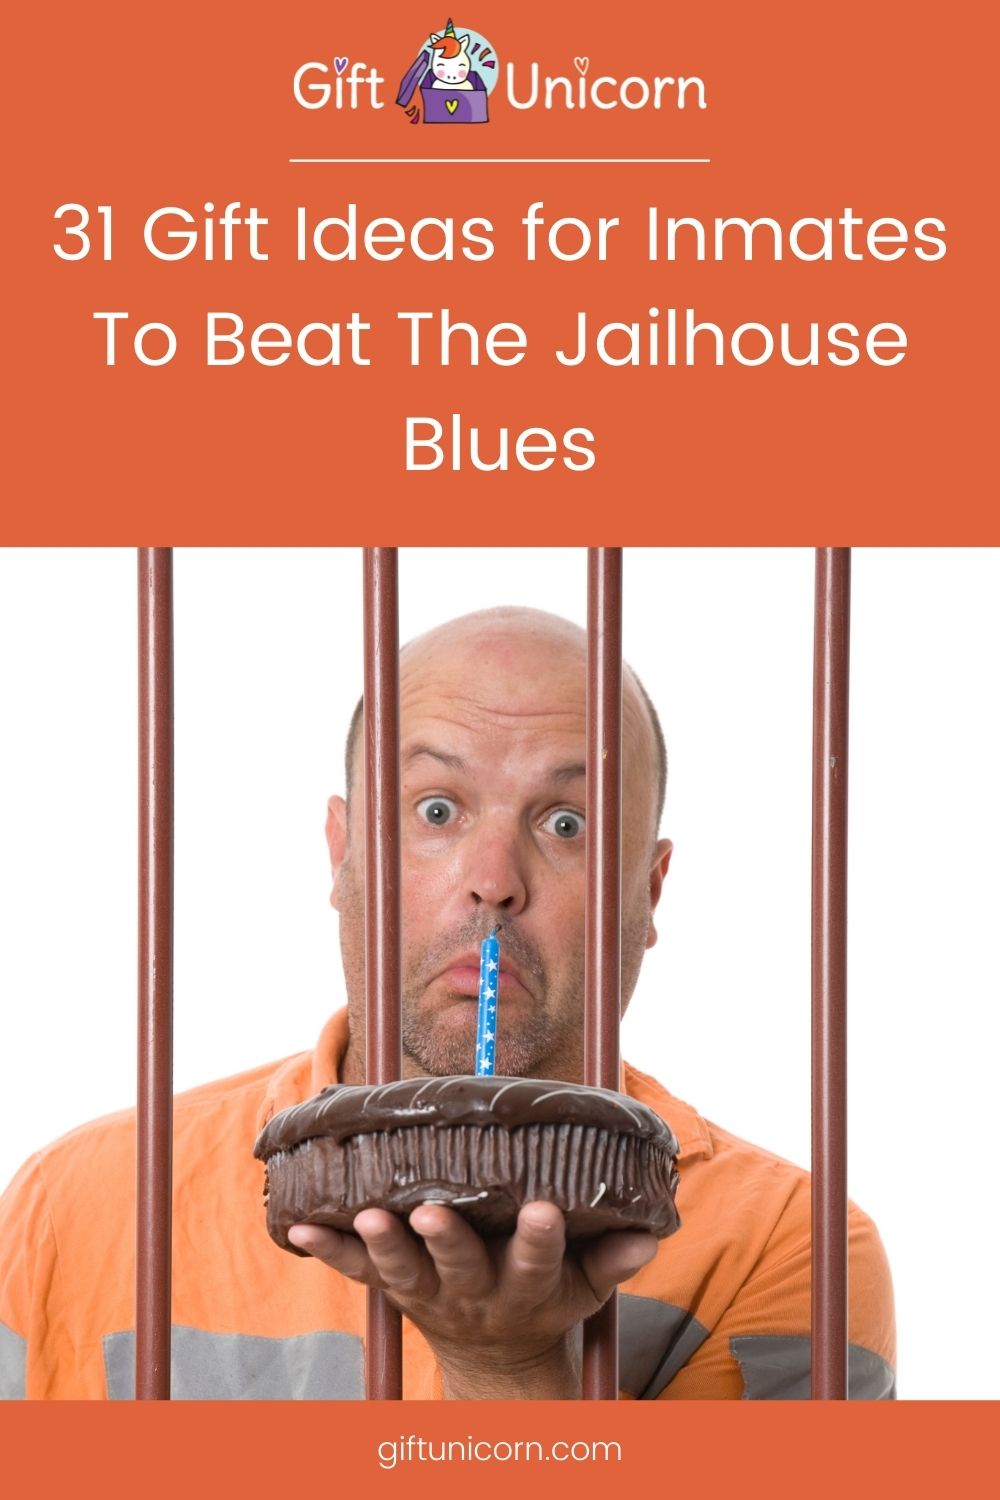 31 Gift Ideas for Inmates To Beat The Jailhouse Blues - pinterest pin image